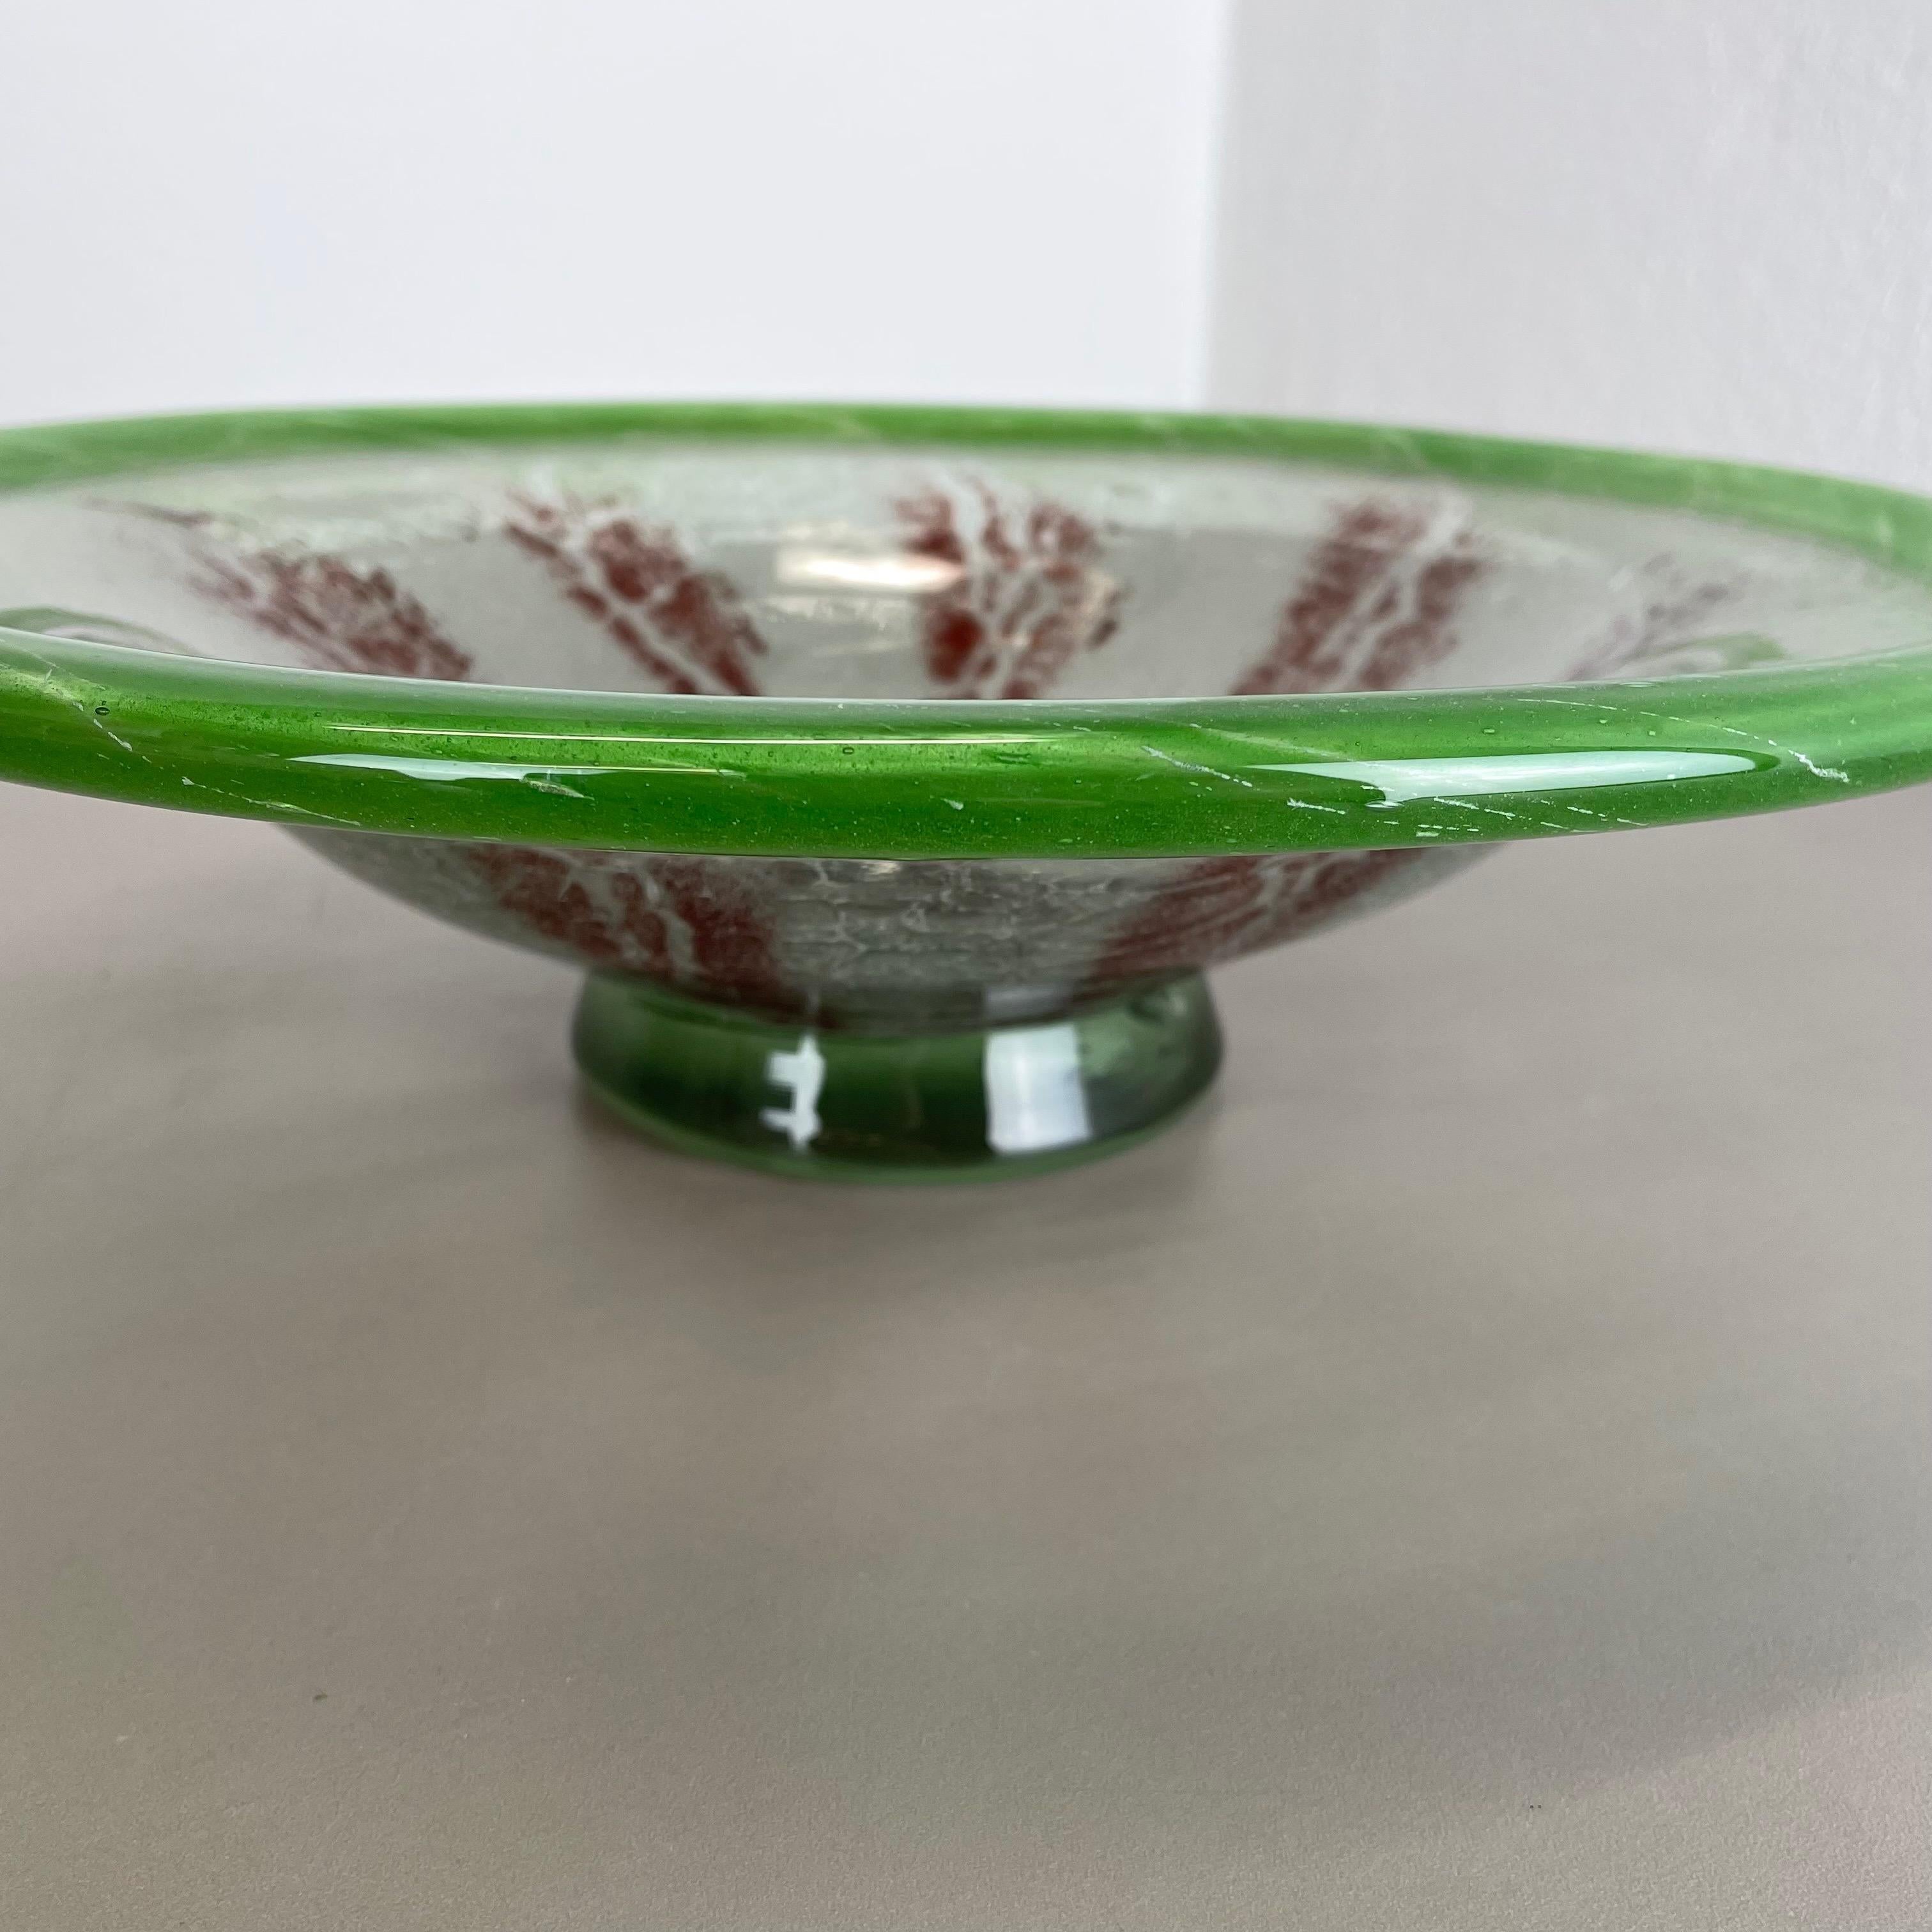 Large Baushaus Art Deco Glass Bowl by Karl Wiedmann for WMF Ikora, Germany 1930s For Sale 9